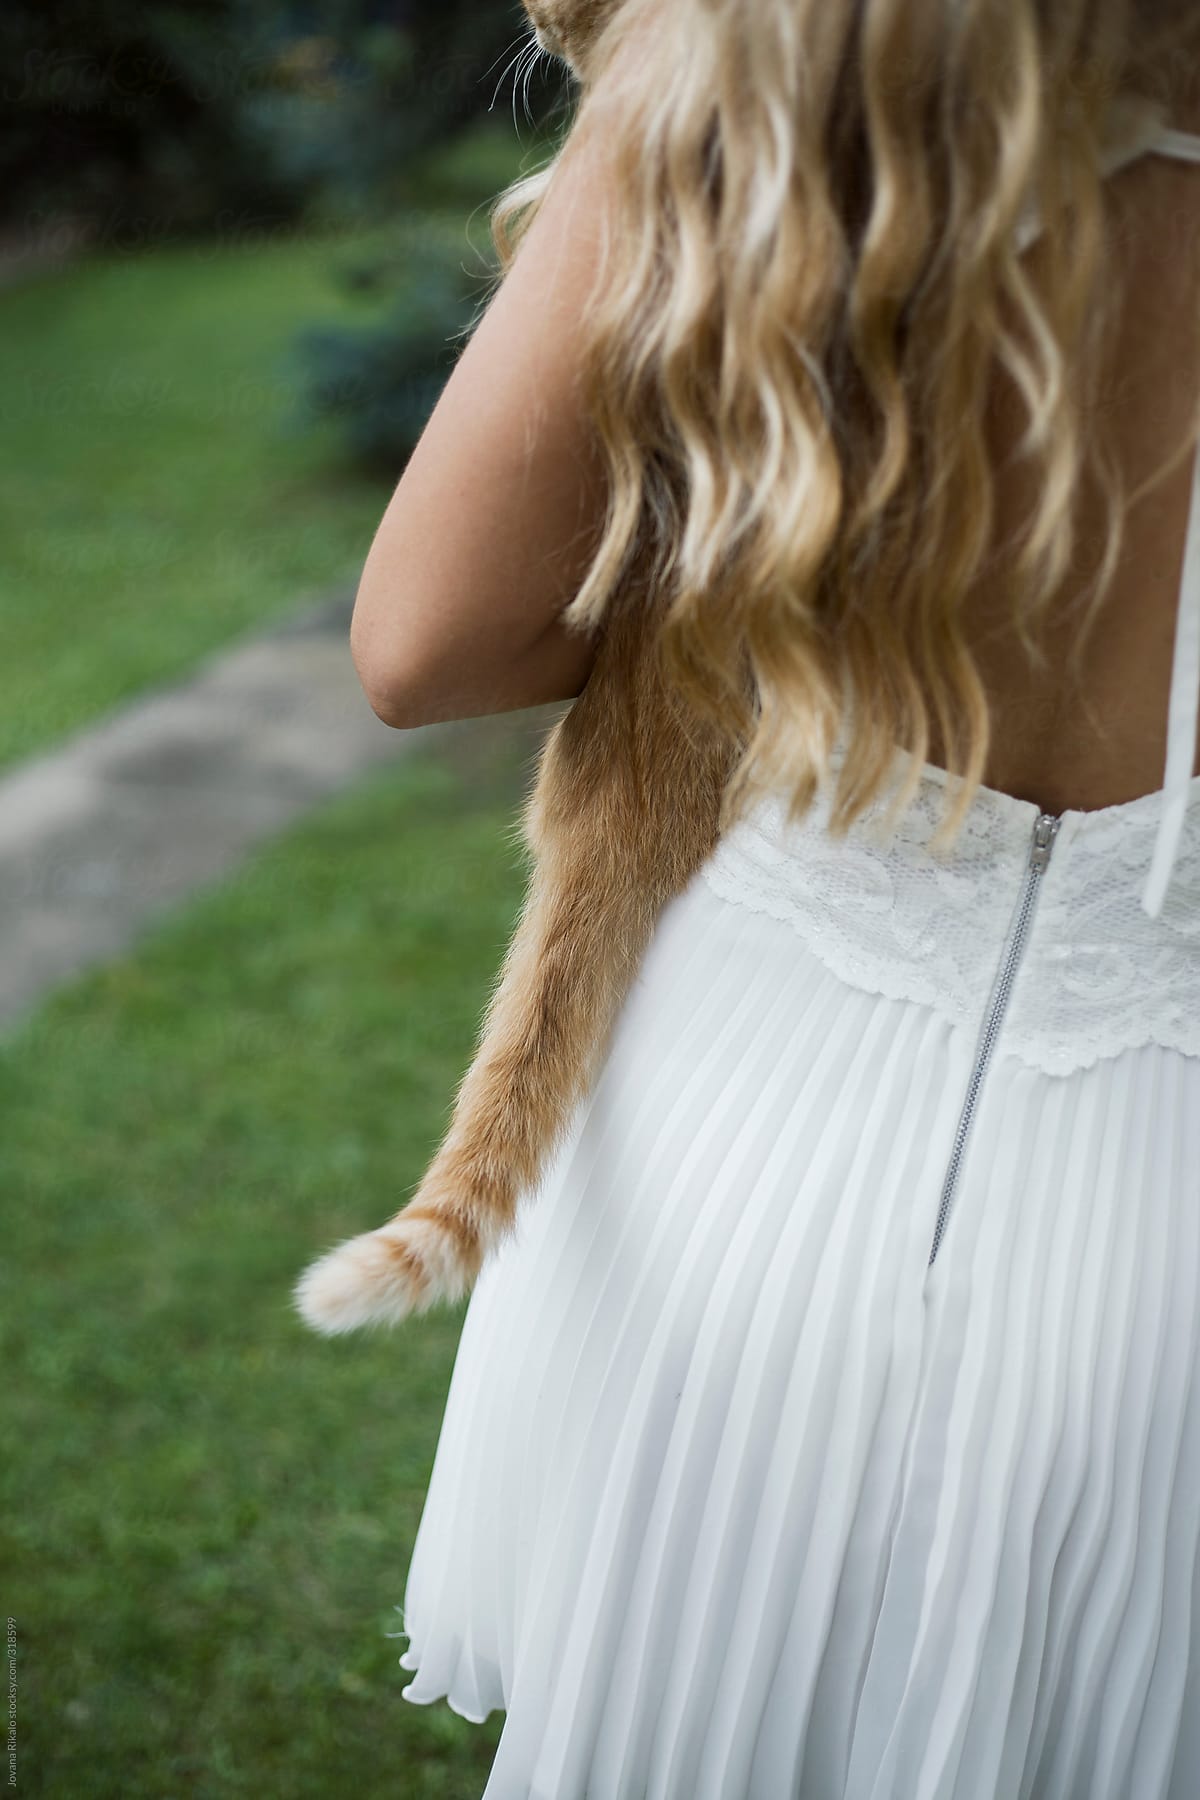 Back view of a young woman holding a little cat